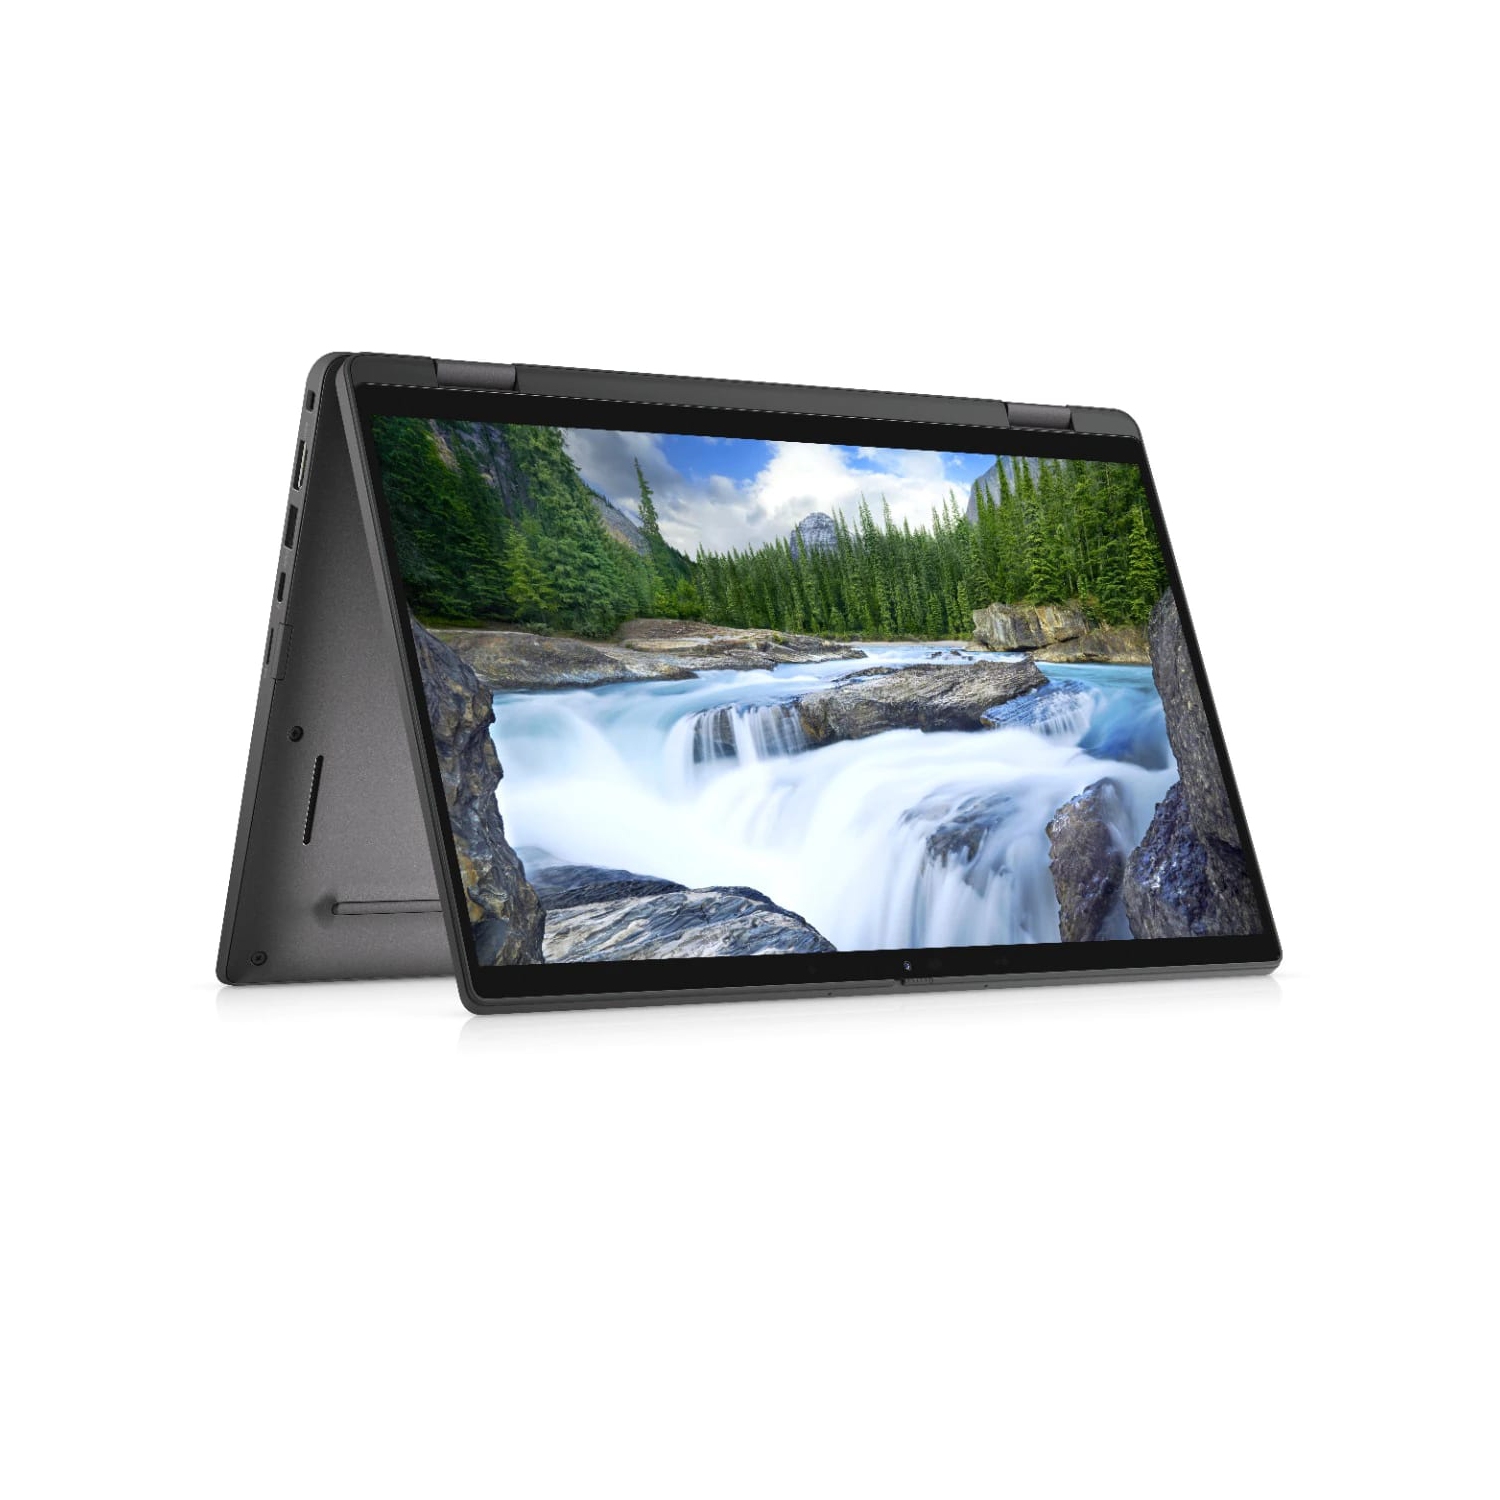 Refurbished (Excellent) - Dell Latitude 7000 7420 2-in-1 (2021) | 14" FHD Touch | Core i7 - 256GB SSD - 8GB RAM | 4 Cores @ 4.4 GHz - 11th Gen CPU Certified Refurbished